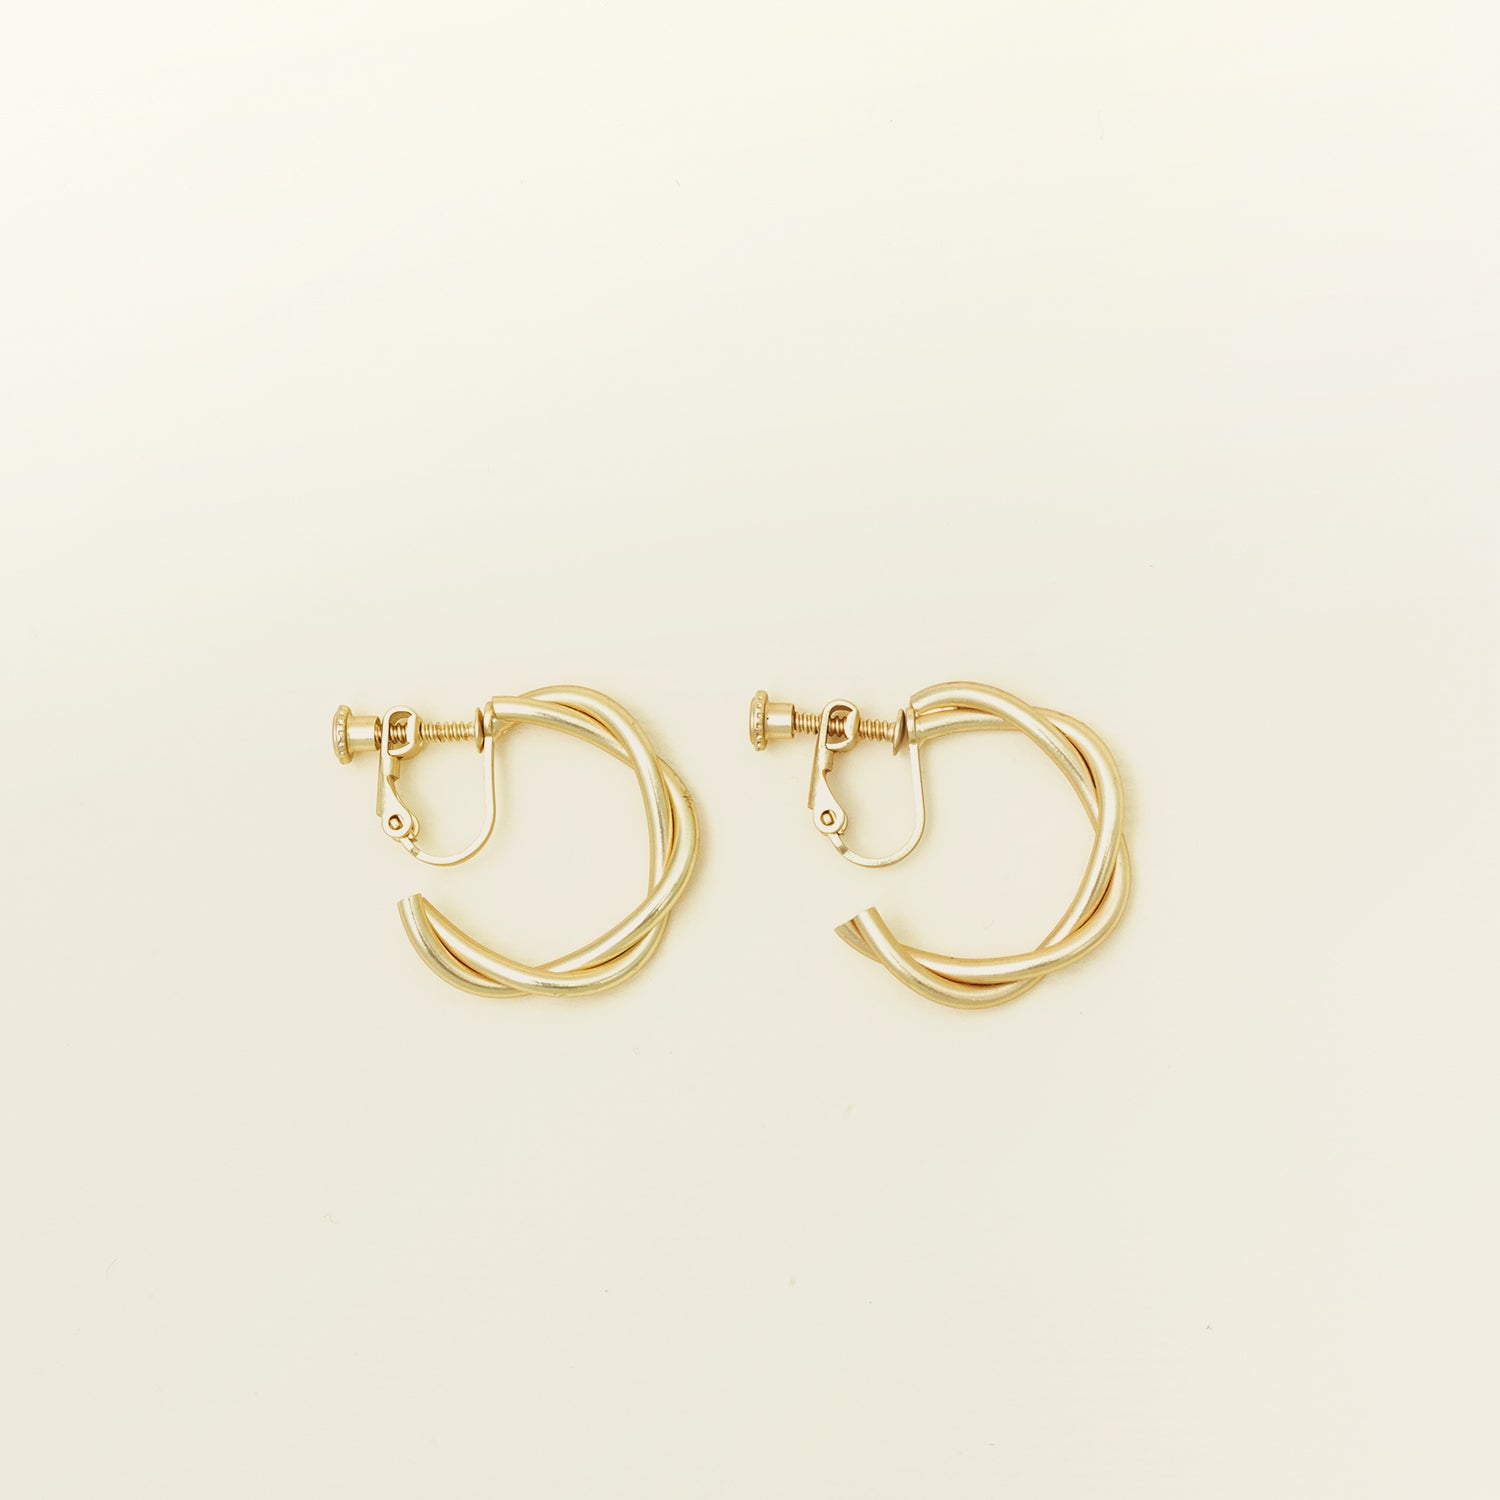 Double Hoop Pave Clip On Earrings in Silver – Aiori